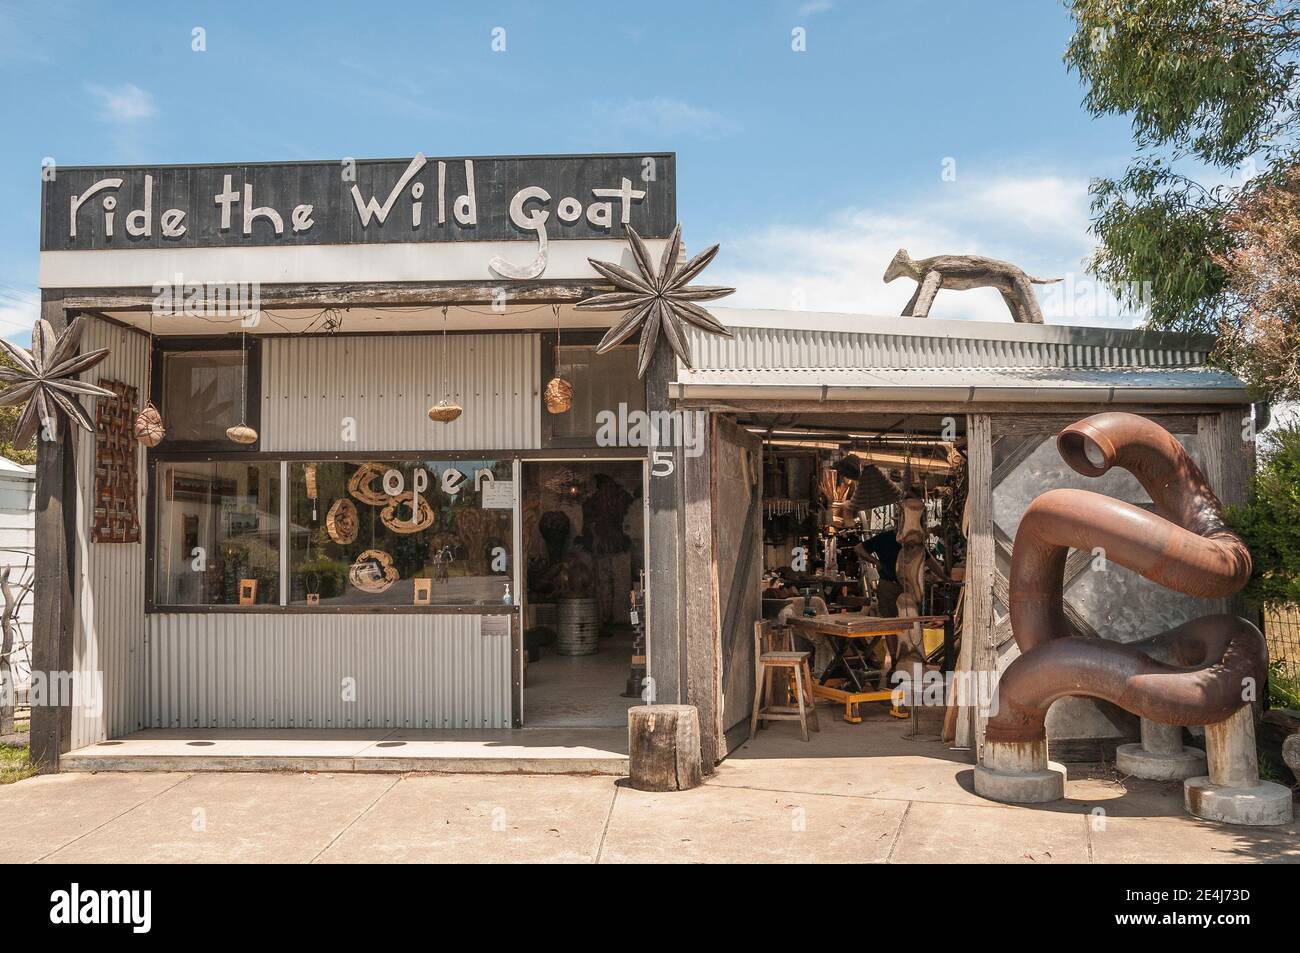 Ride the Wild Goat gallery and store at Fish Creek, South Gippsland, Victoria, Australia Stock Photo